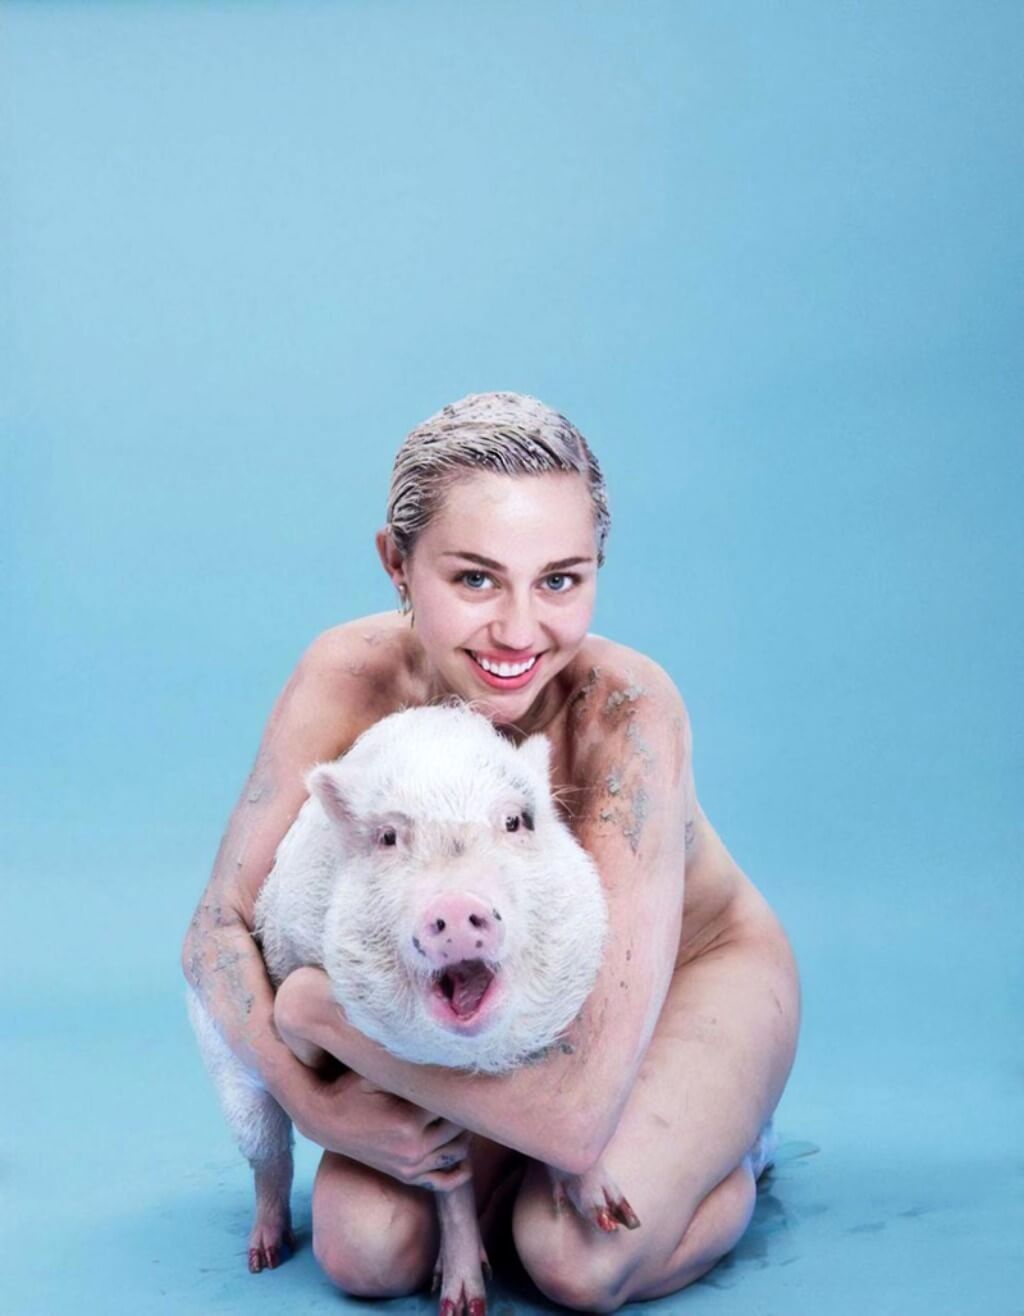 Mileys topless picture - Real Naked Girls